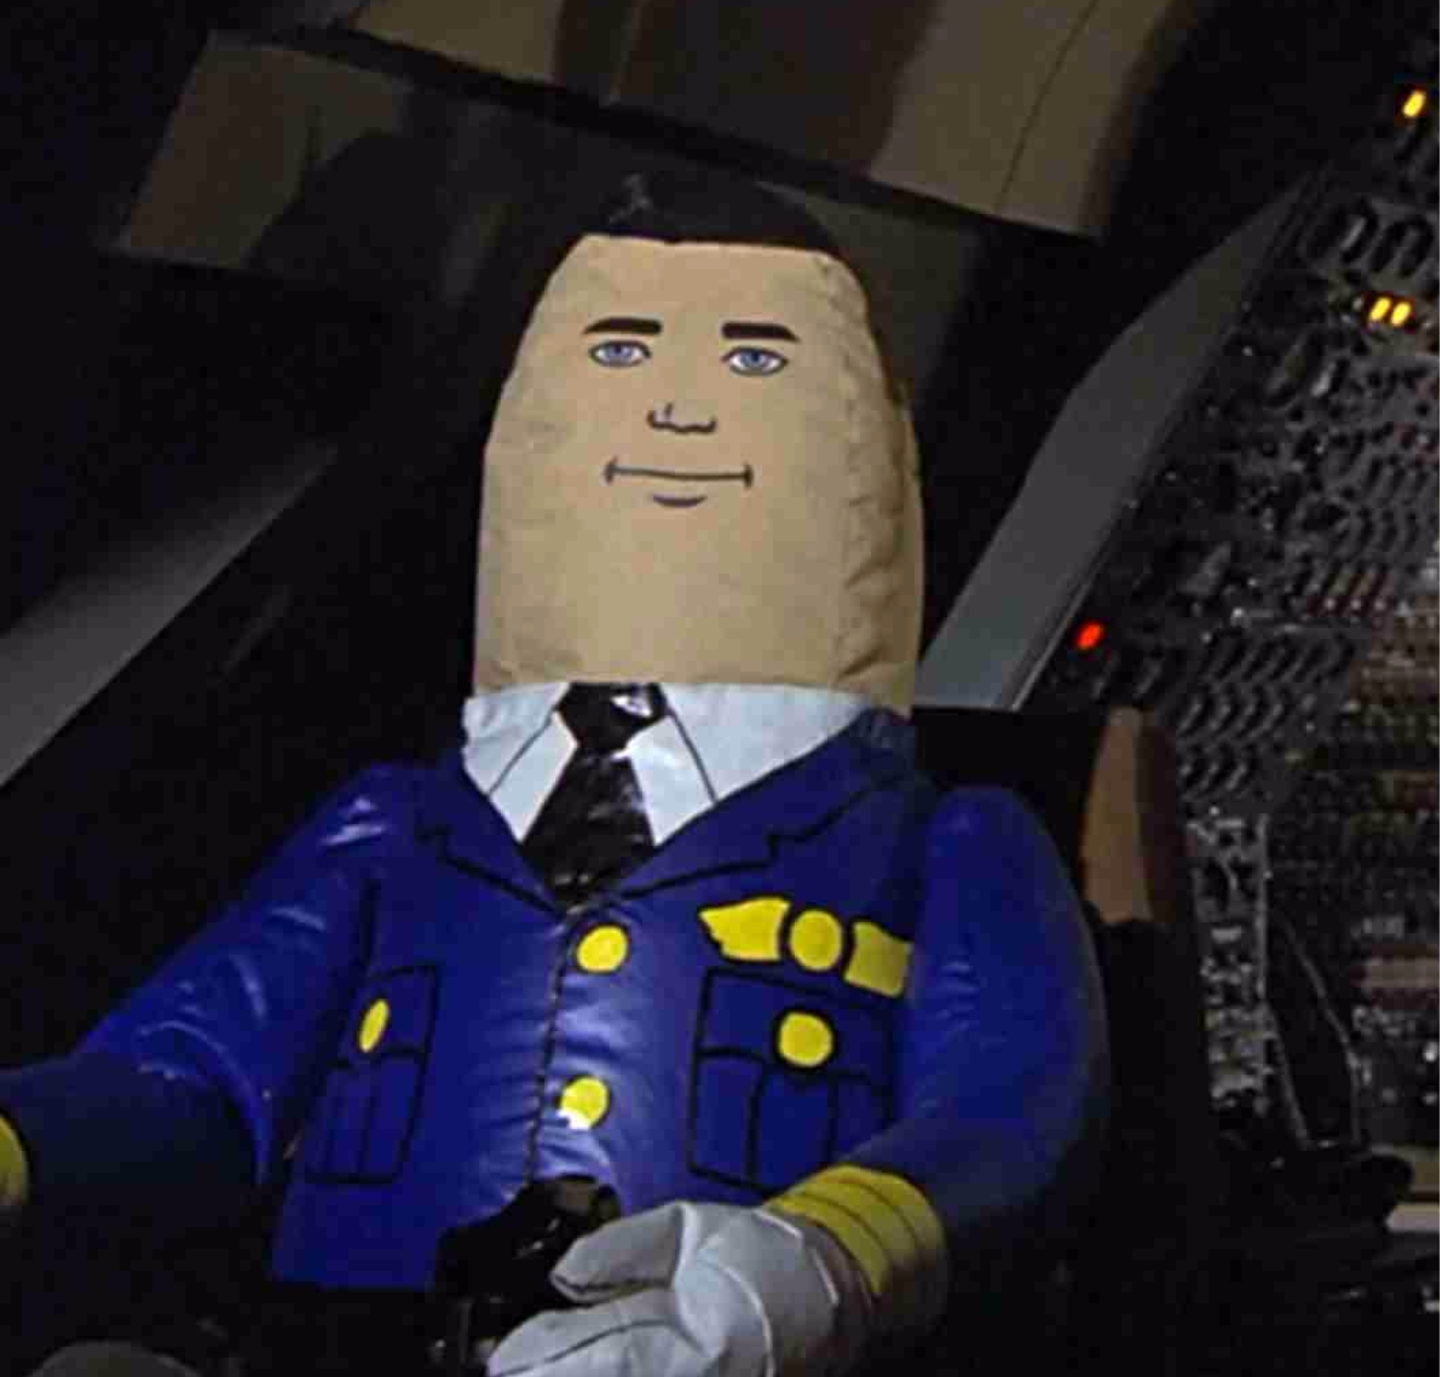 inflatable-pilot-from-airplane-movie.jpg